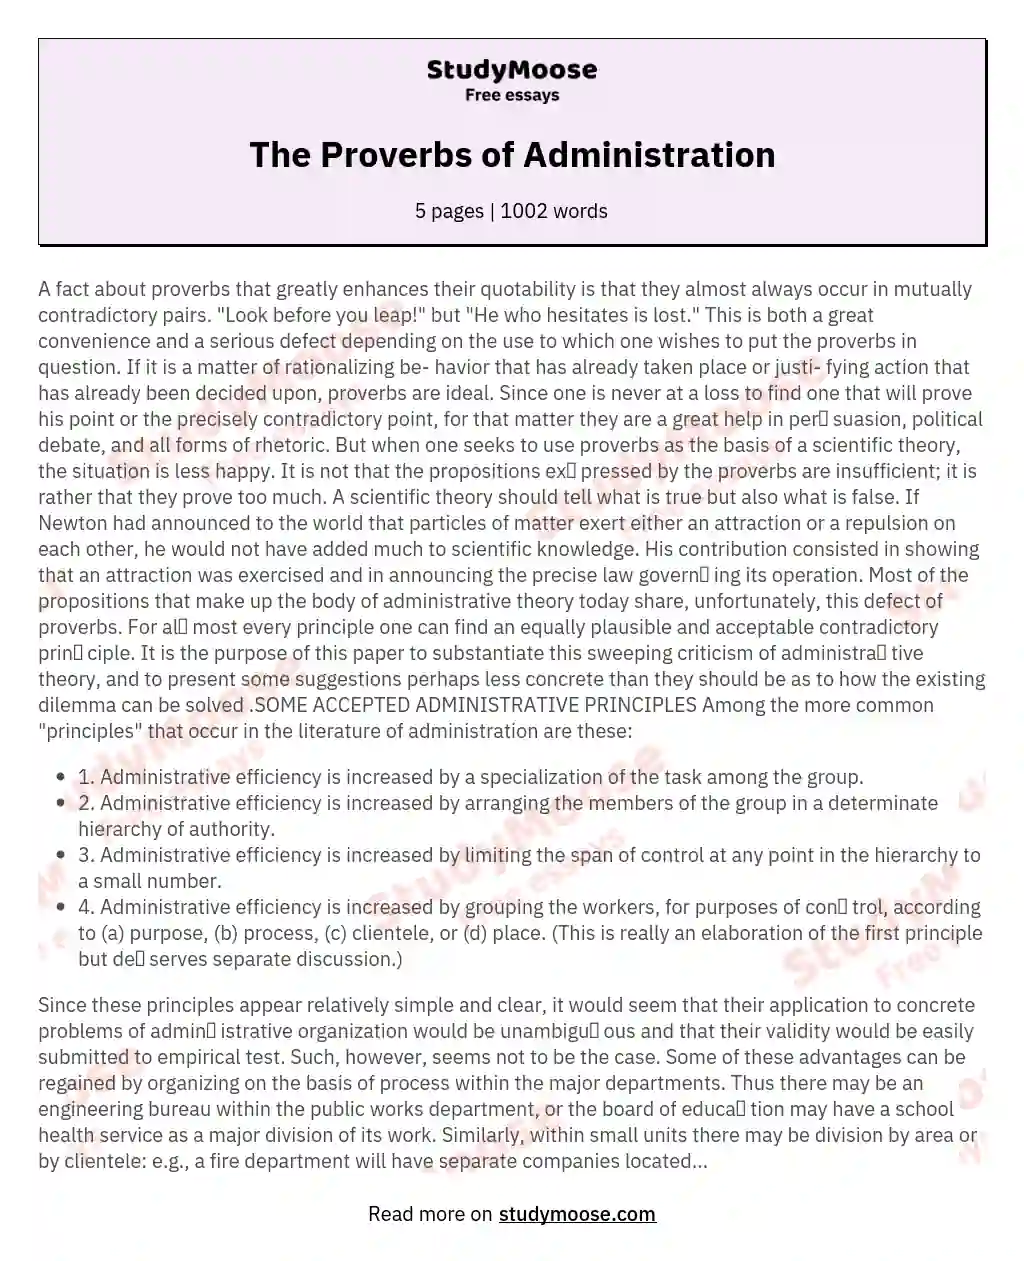 The Proverbs of Administration essay